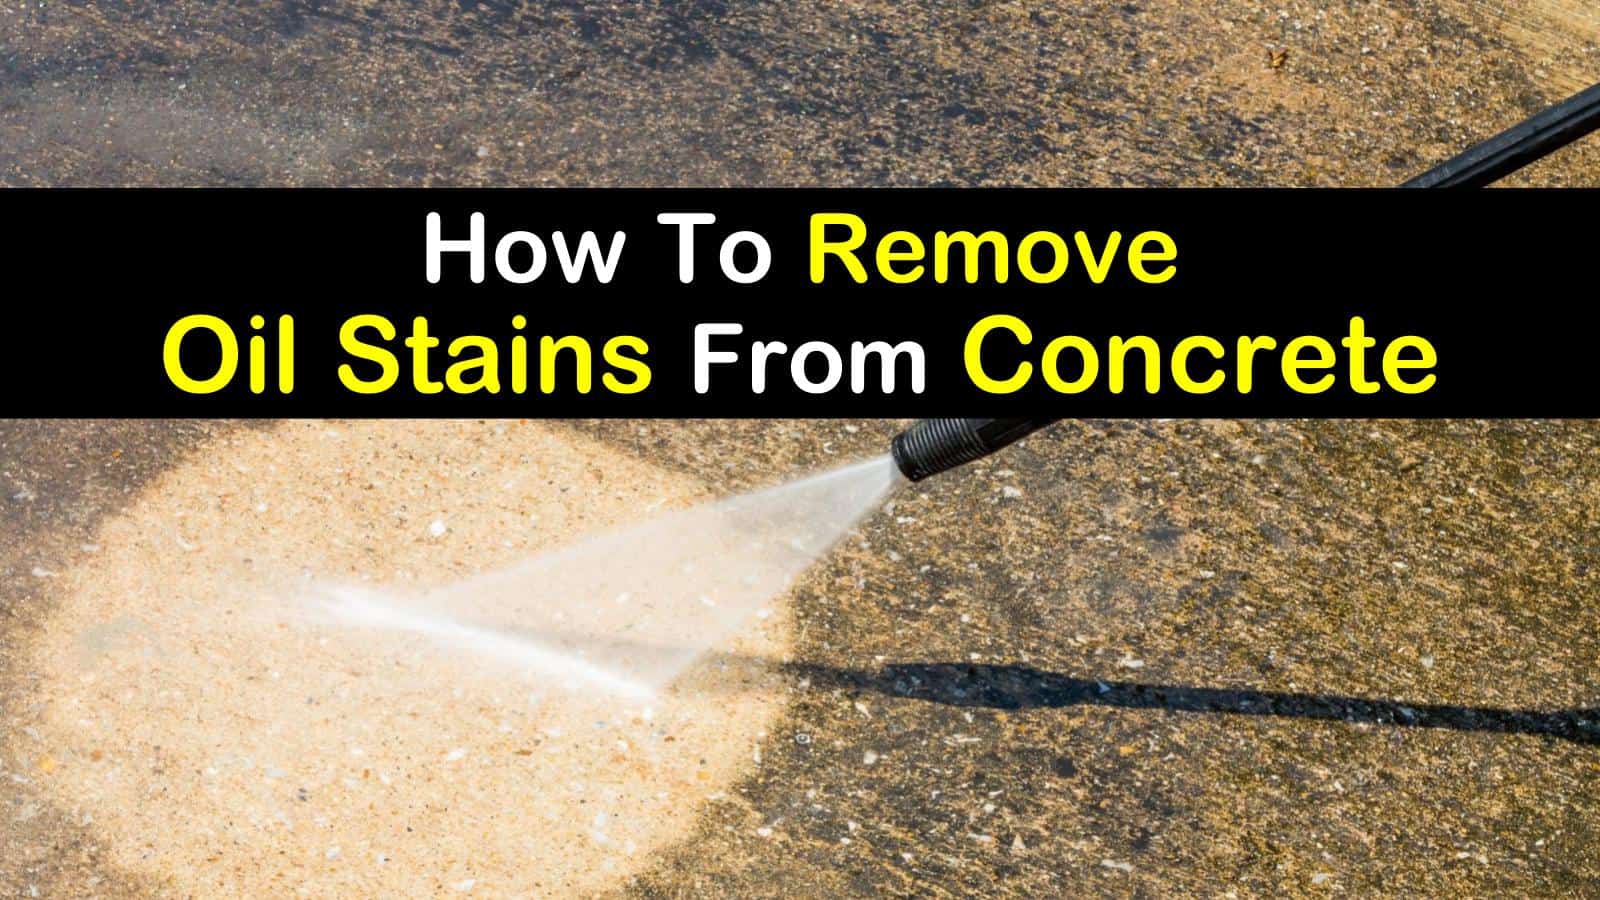 how to remove oil stains from concrete titlimg1